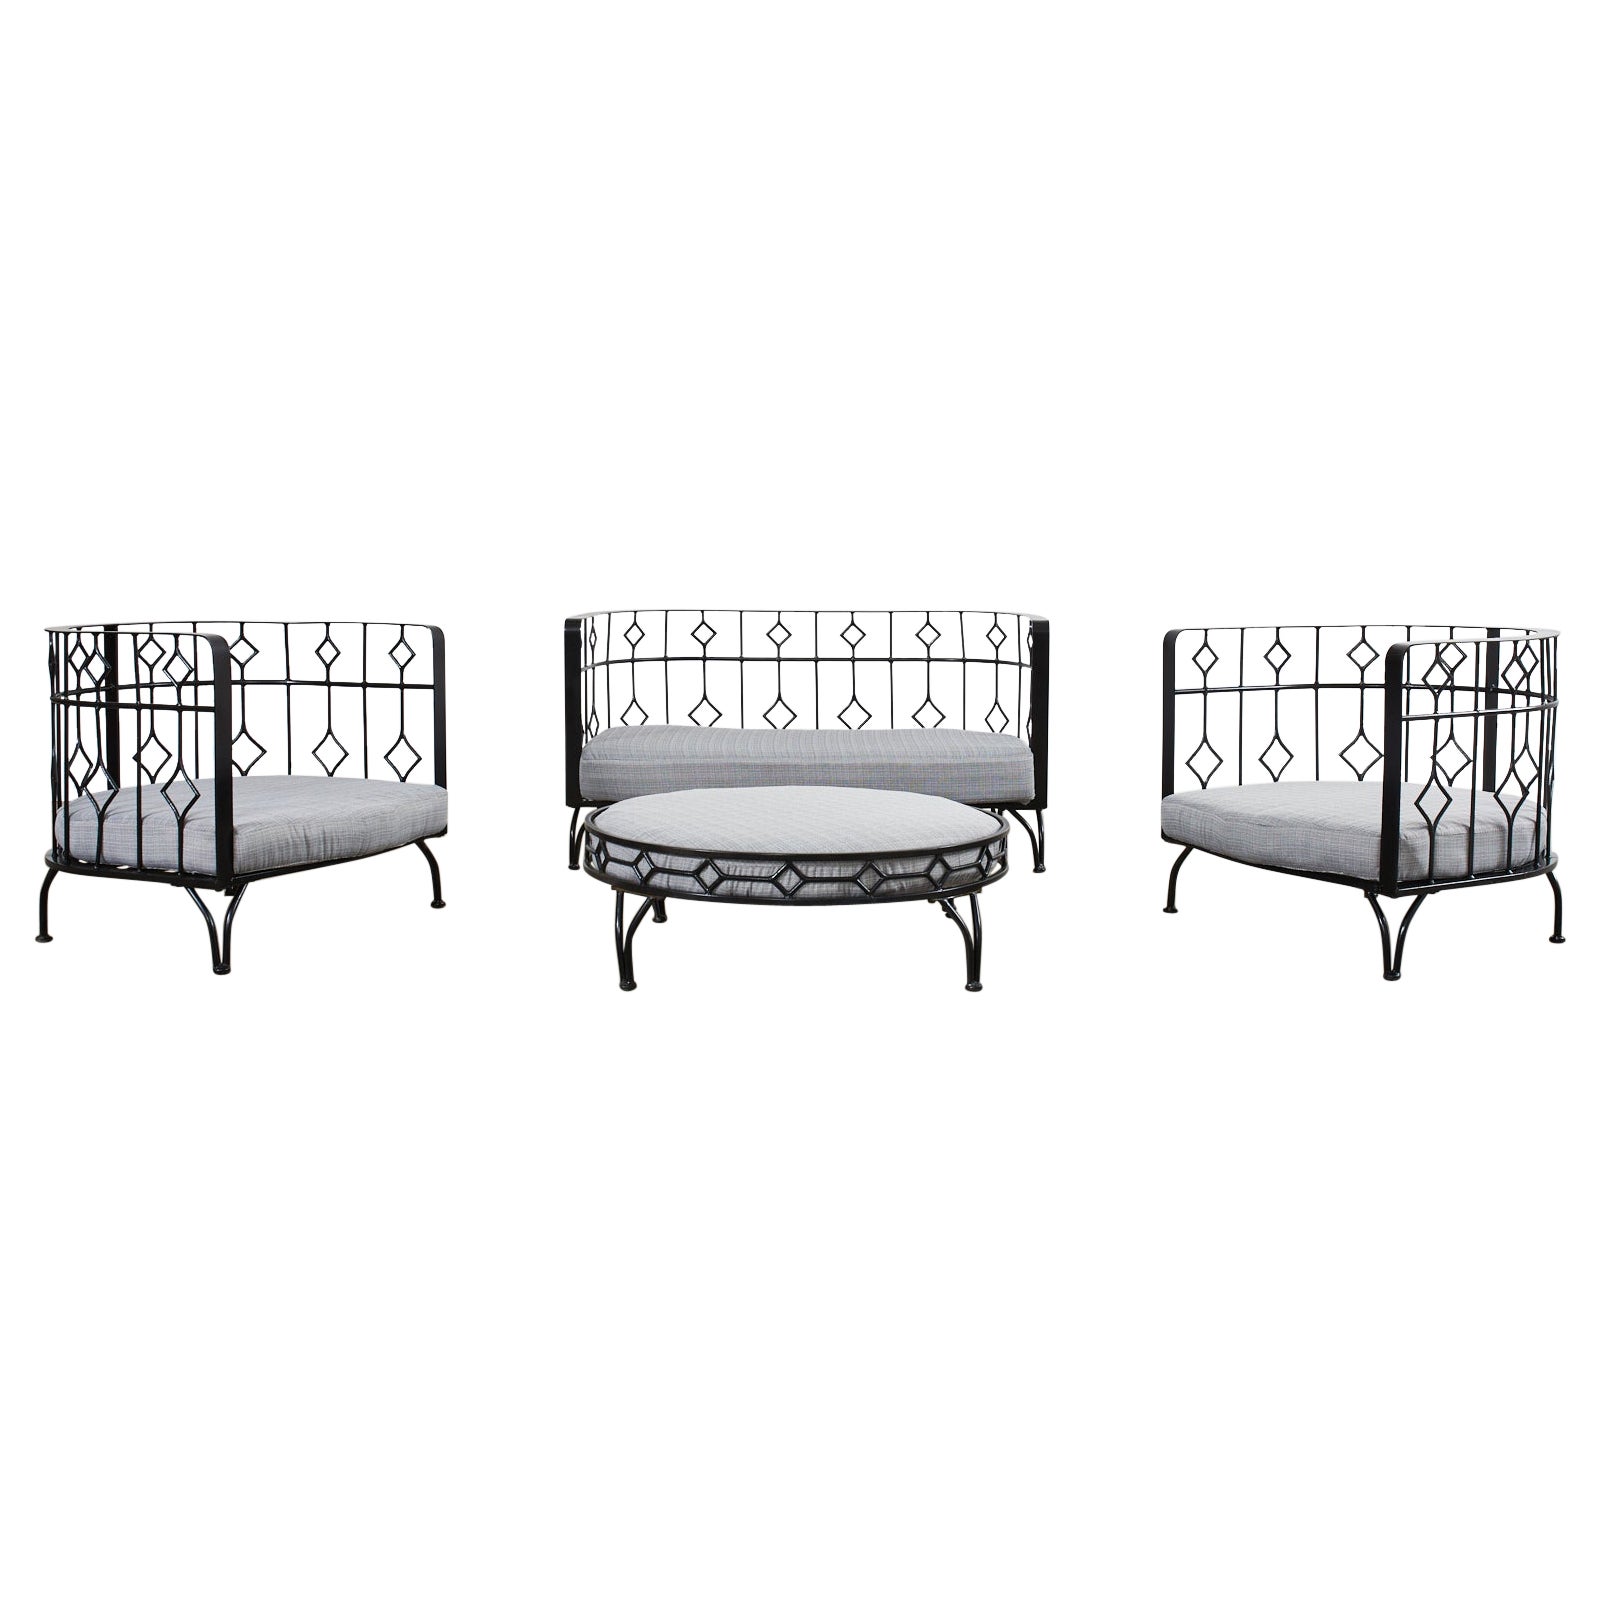 Modern Set of Four Iron Demilune Garden Lounge Chairs and Settee